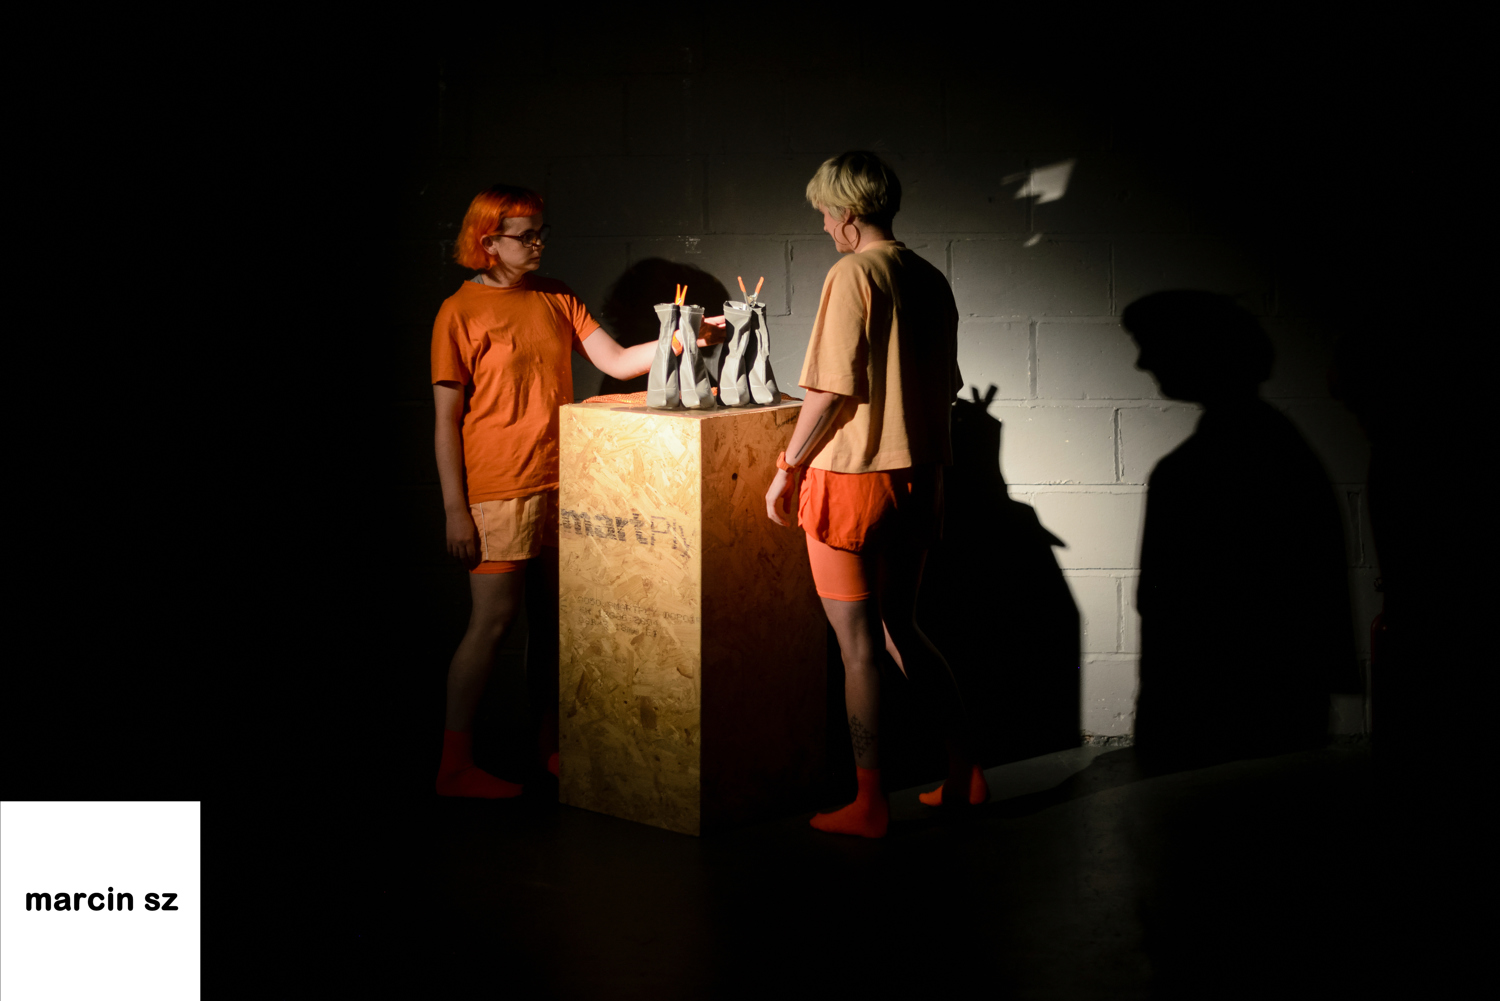 Emily and Emily stand in a spotlight next to a wooden plinth. On it are two pairs of reflective heeled boots.